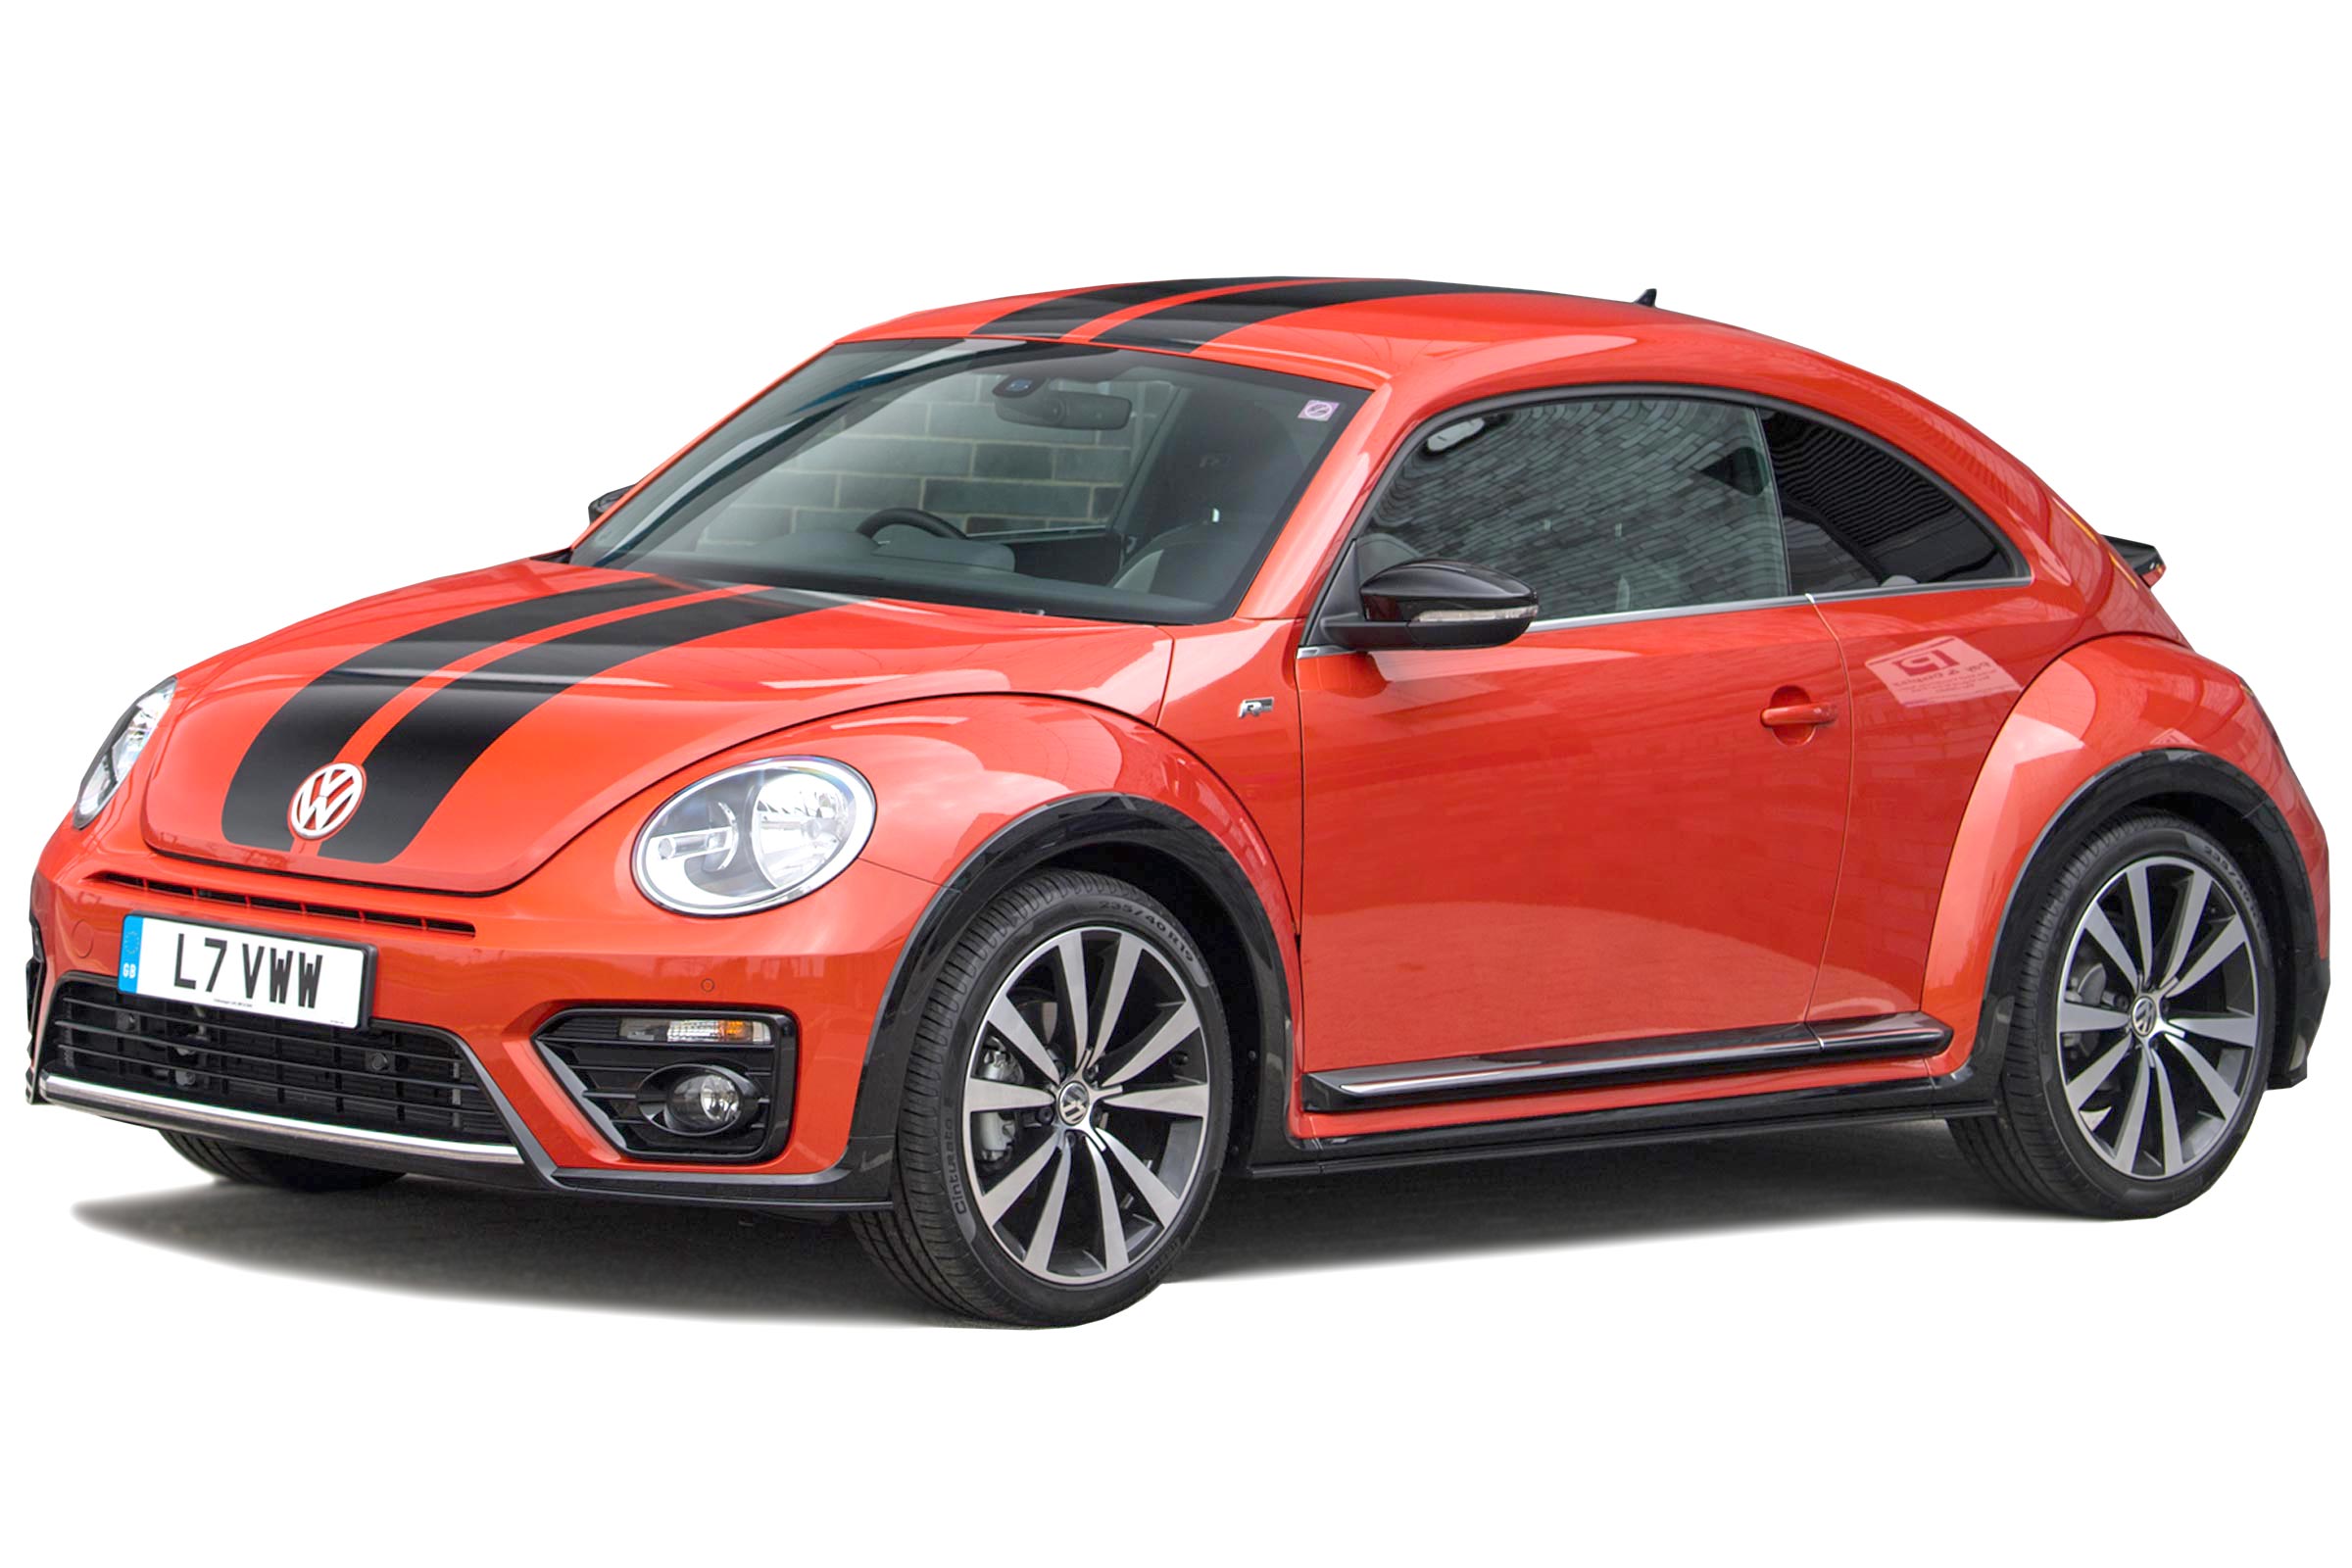 Volkswagen Beetle Owner Reviews Mpg Problems Reliability Carbuyer